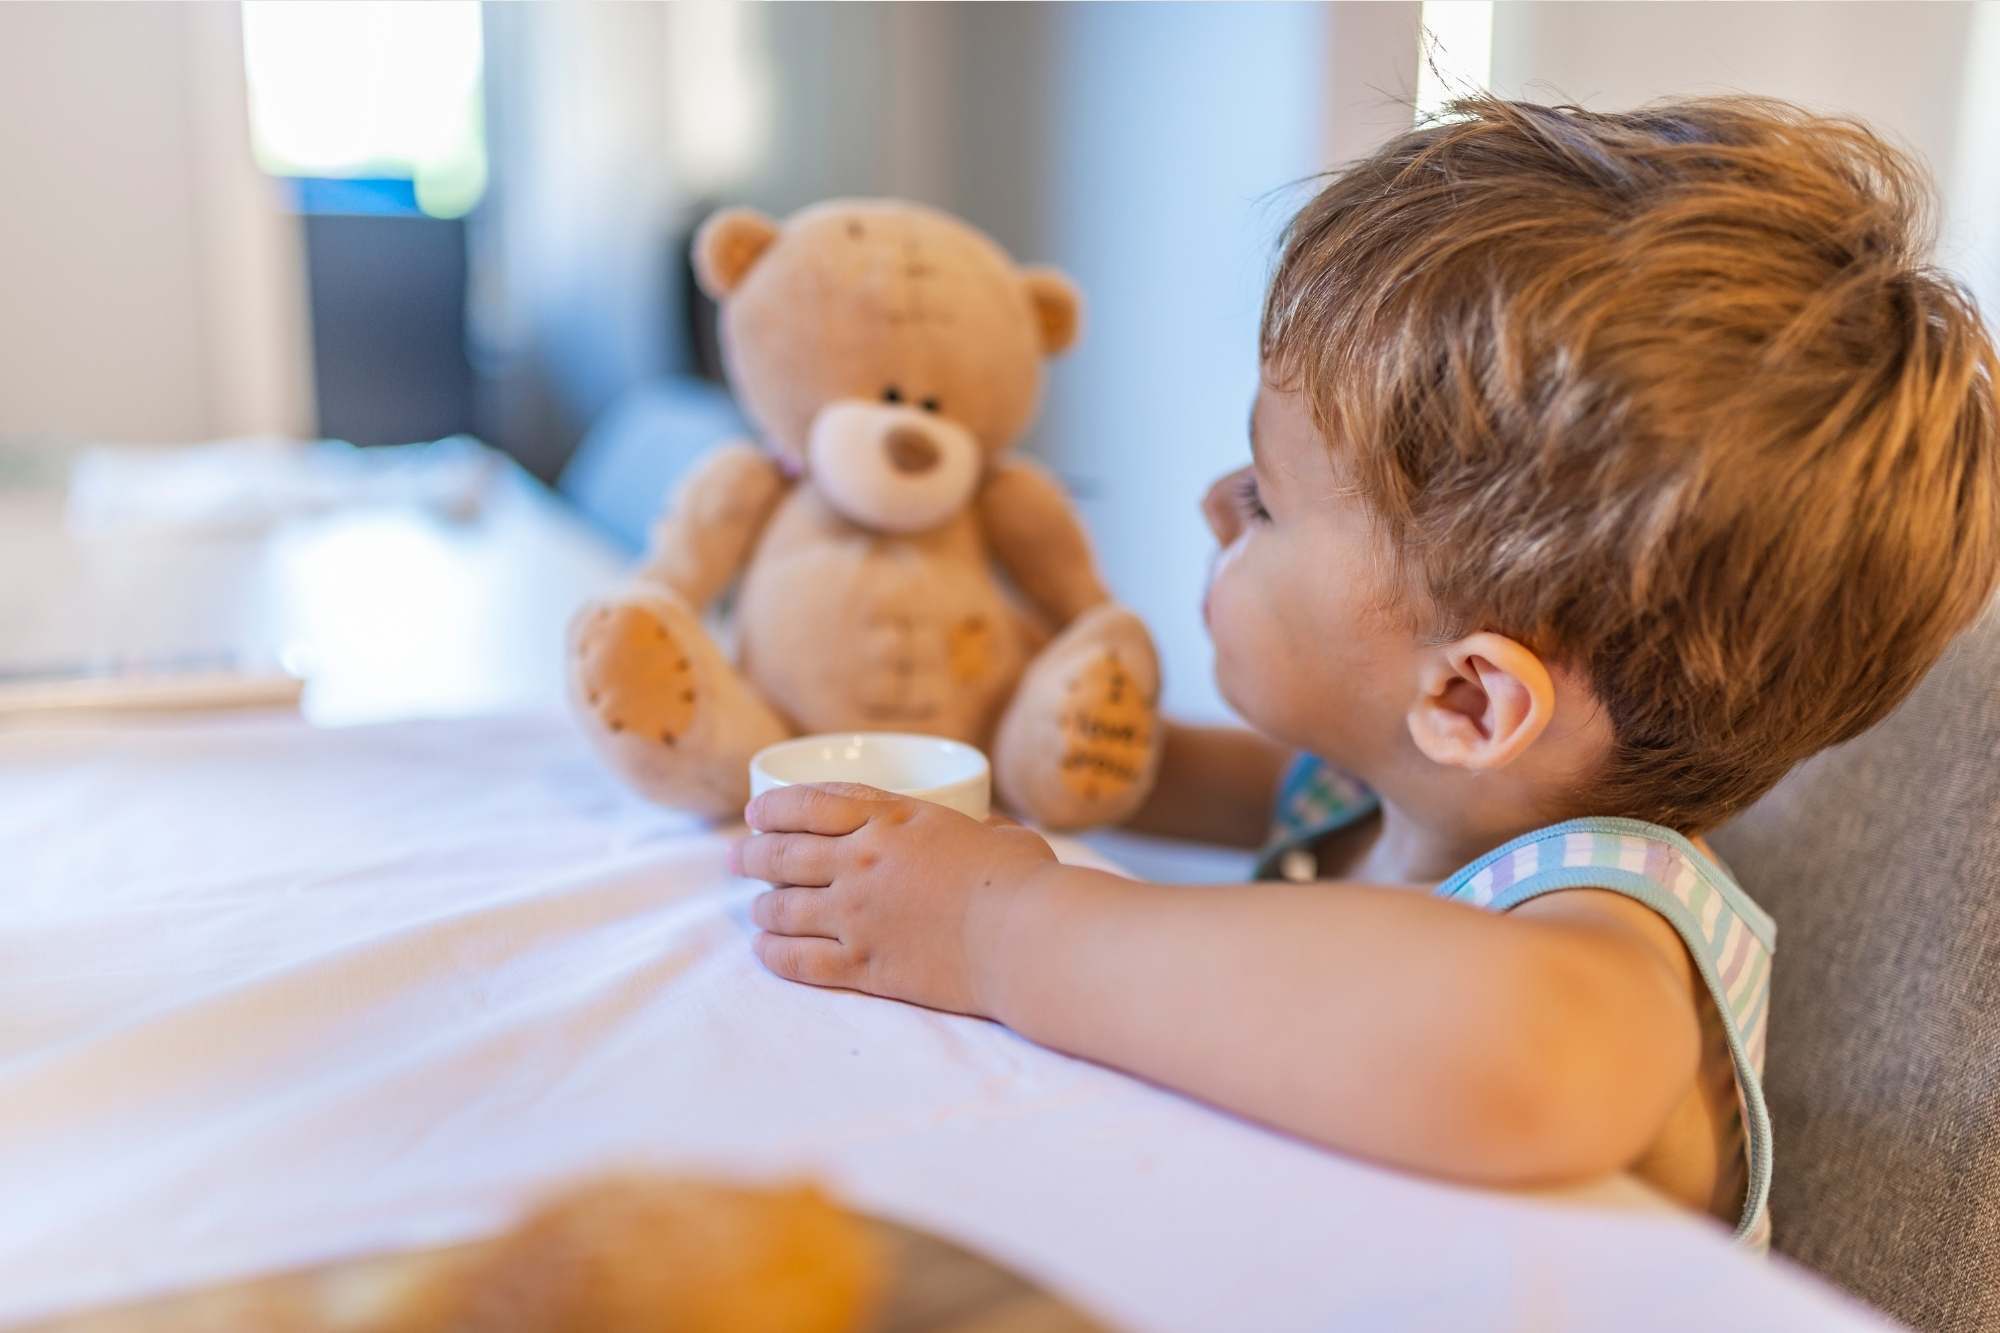 Little boy playing with his bear - imaginary play